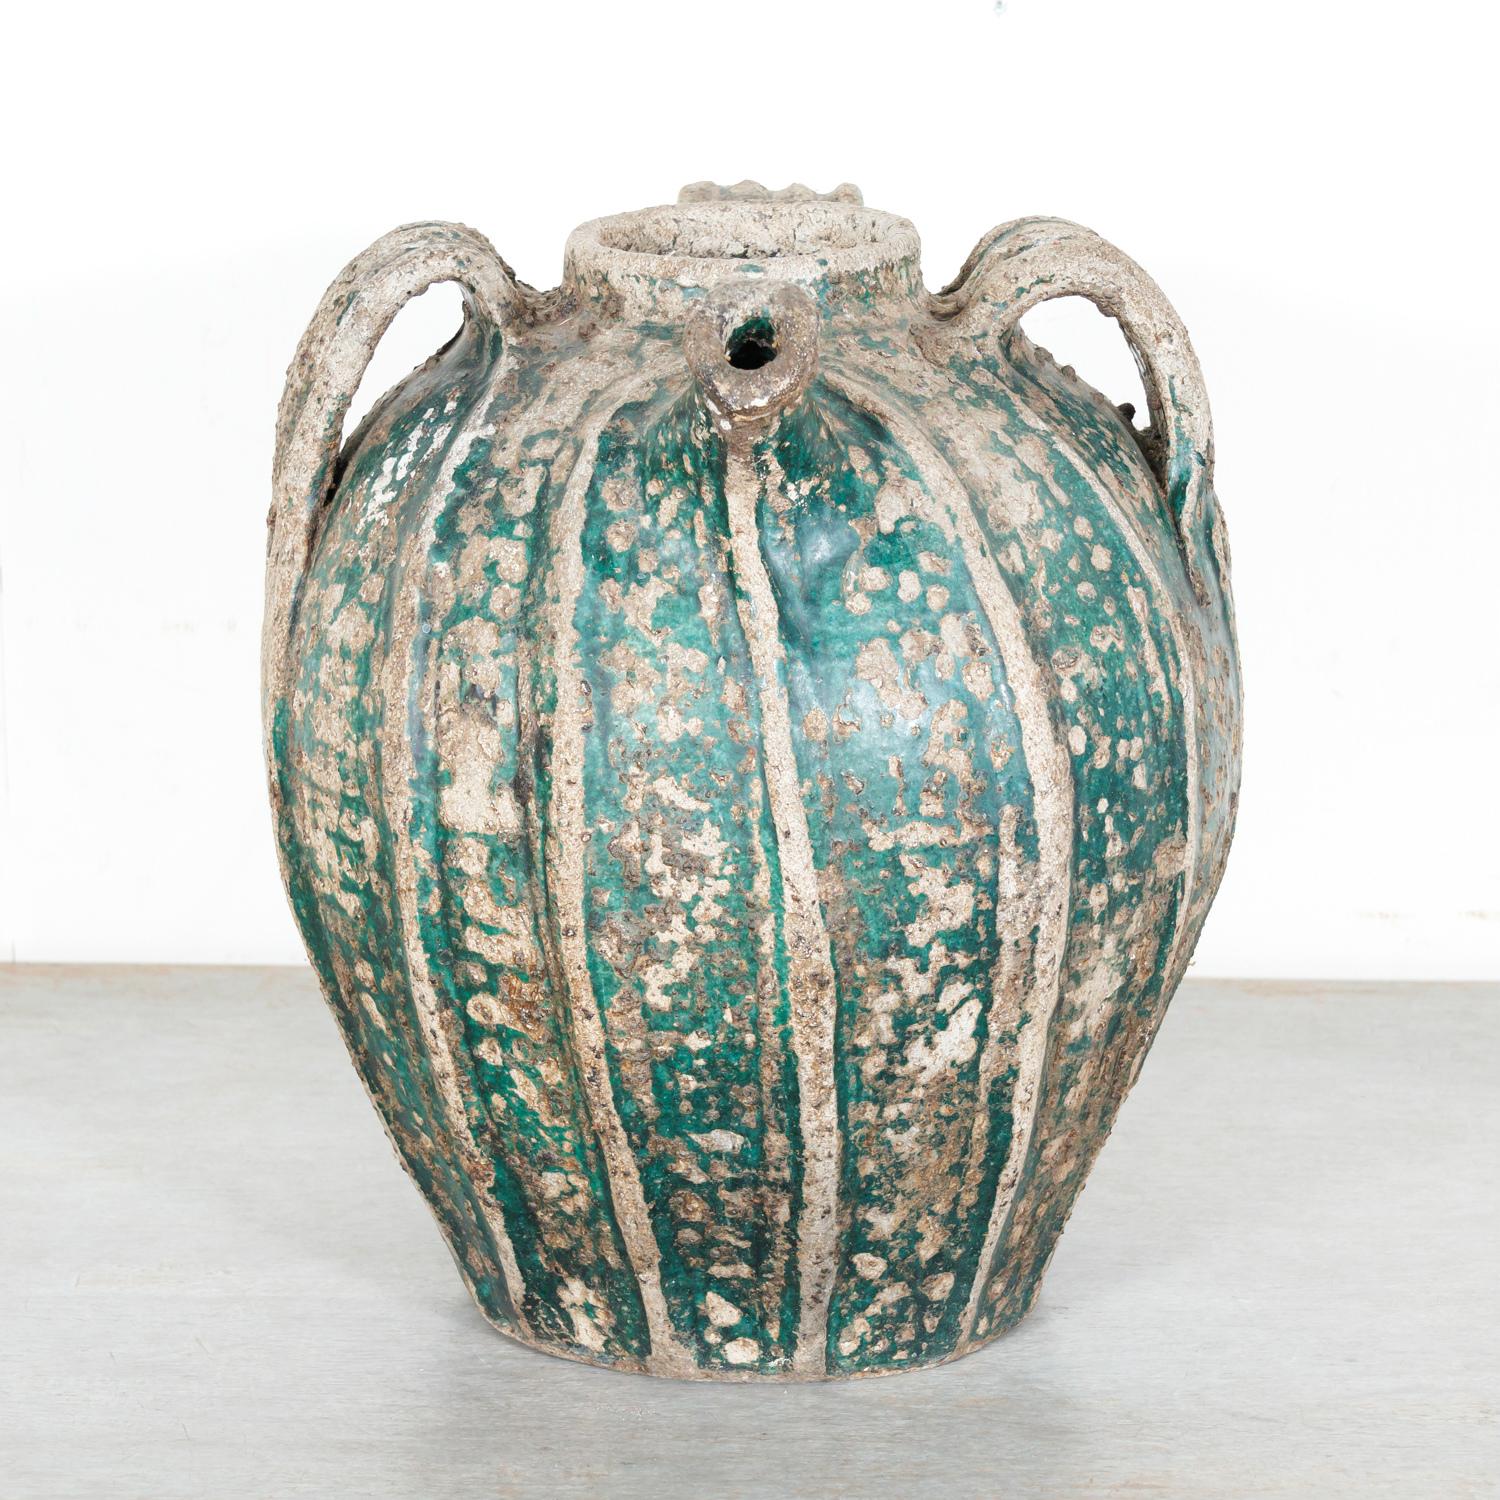 A large 18th century French glazed terracotta cruche du Quercy or walnut oil jug having great sculptural form and artisan quality, handmade by a talented potter in Quercy, a former province in southwest France, circa mid 1700s. This rare glazed